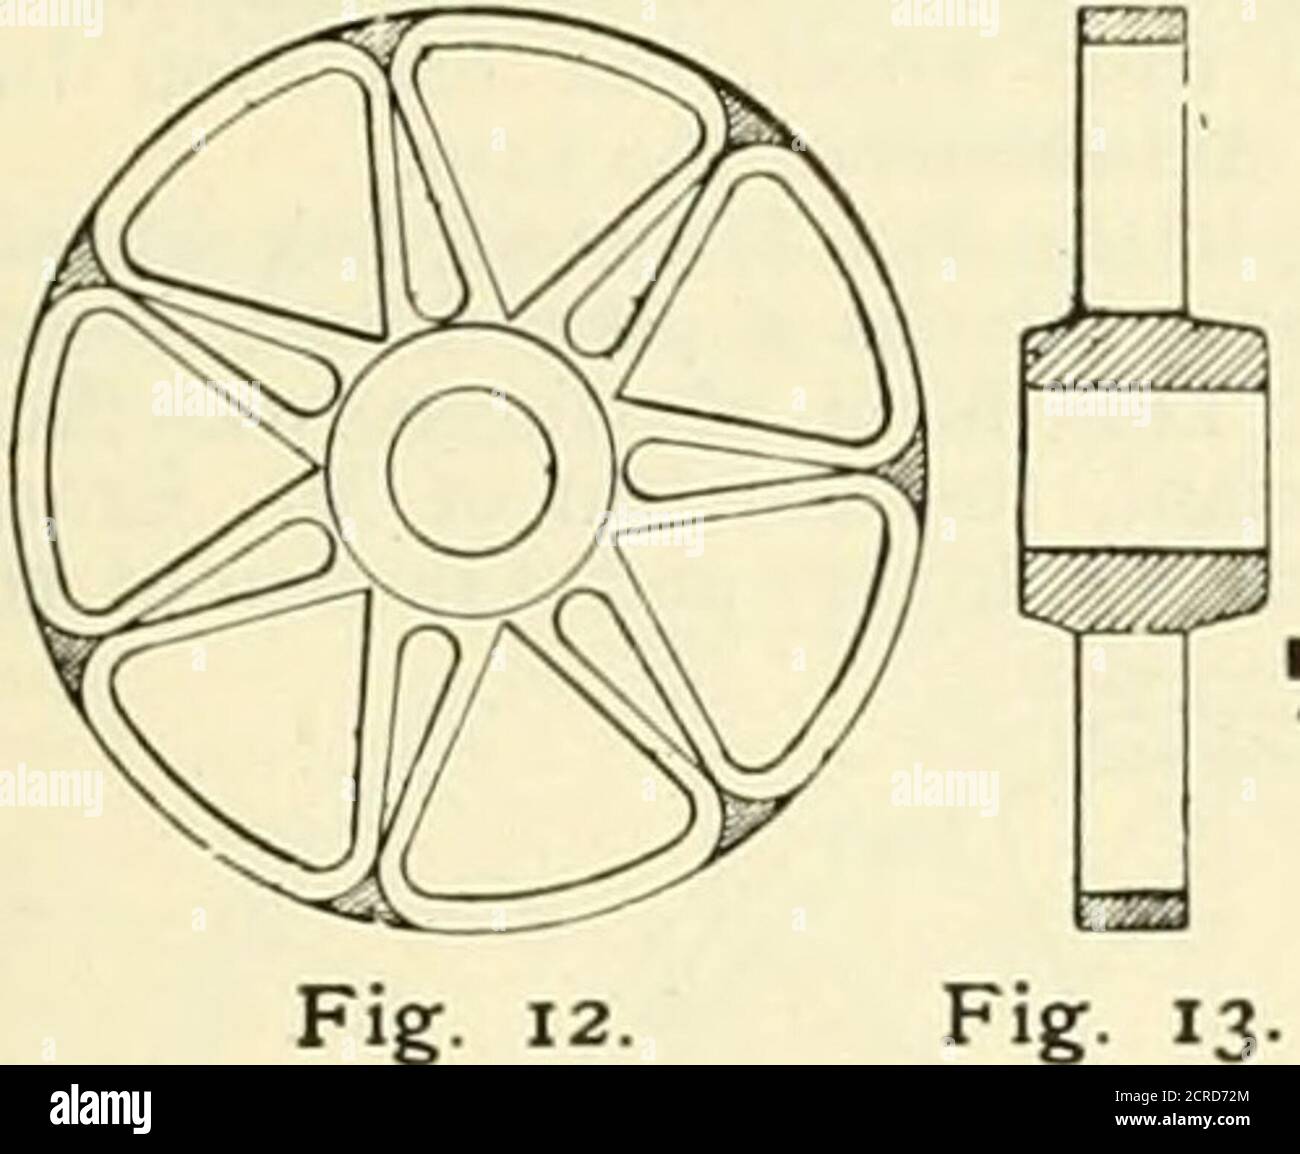 . American engineer and railroad journal . Vol. LXVII, No. ic] AND RAILROAD JOURNAL 493 parts of which hiive previously Been fitted togetlier cold.The process of manufacture for car-wliecls is us follows : A har of suitaljle scctiou. is bent in rolls to form the rim. Tliis ring of metal is in a clamp pro- then held - -vided with screws, as shownin figs. 33 and 24, the un-weliied ends of the liar abut-ting together. It is thenplaced in a fire and the ends•heated to a welding heat.By turning the screw theends are then pressed to-gether, and only a few blowsare needed thereafter tomake a perfect Stock Photo